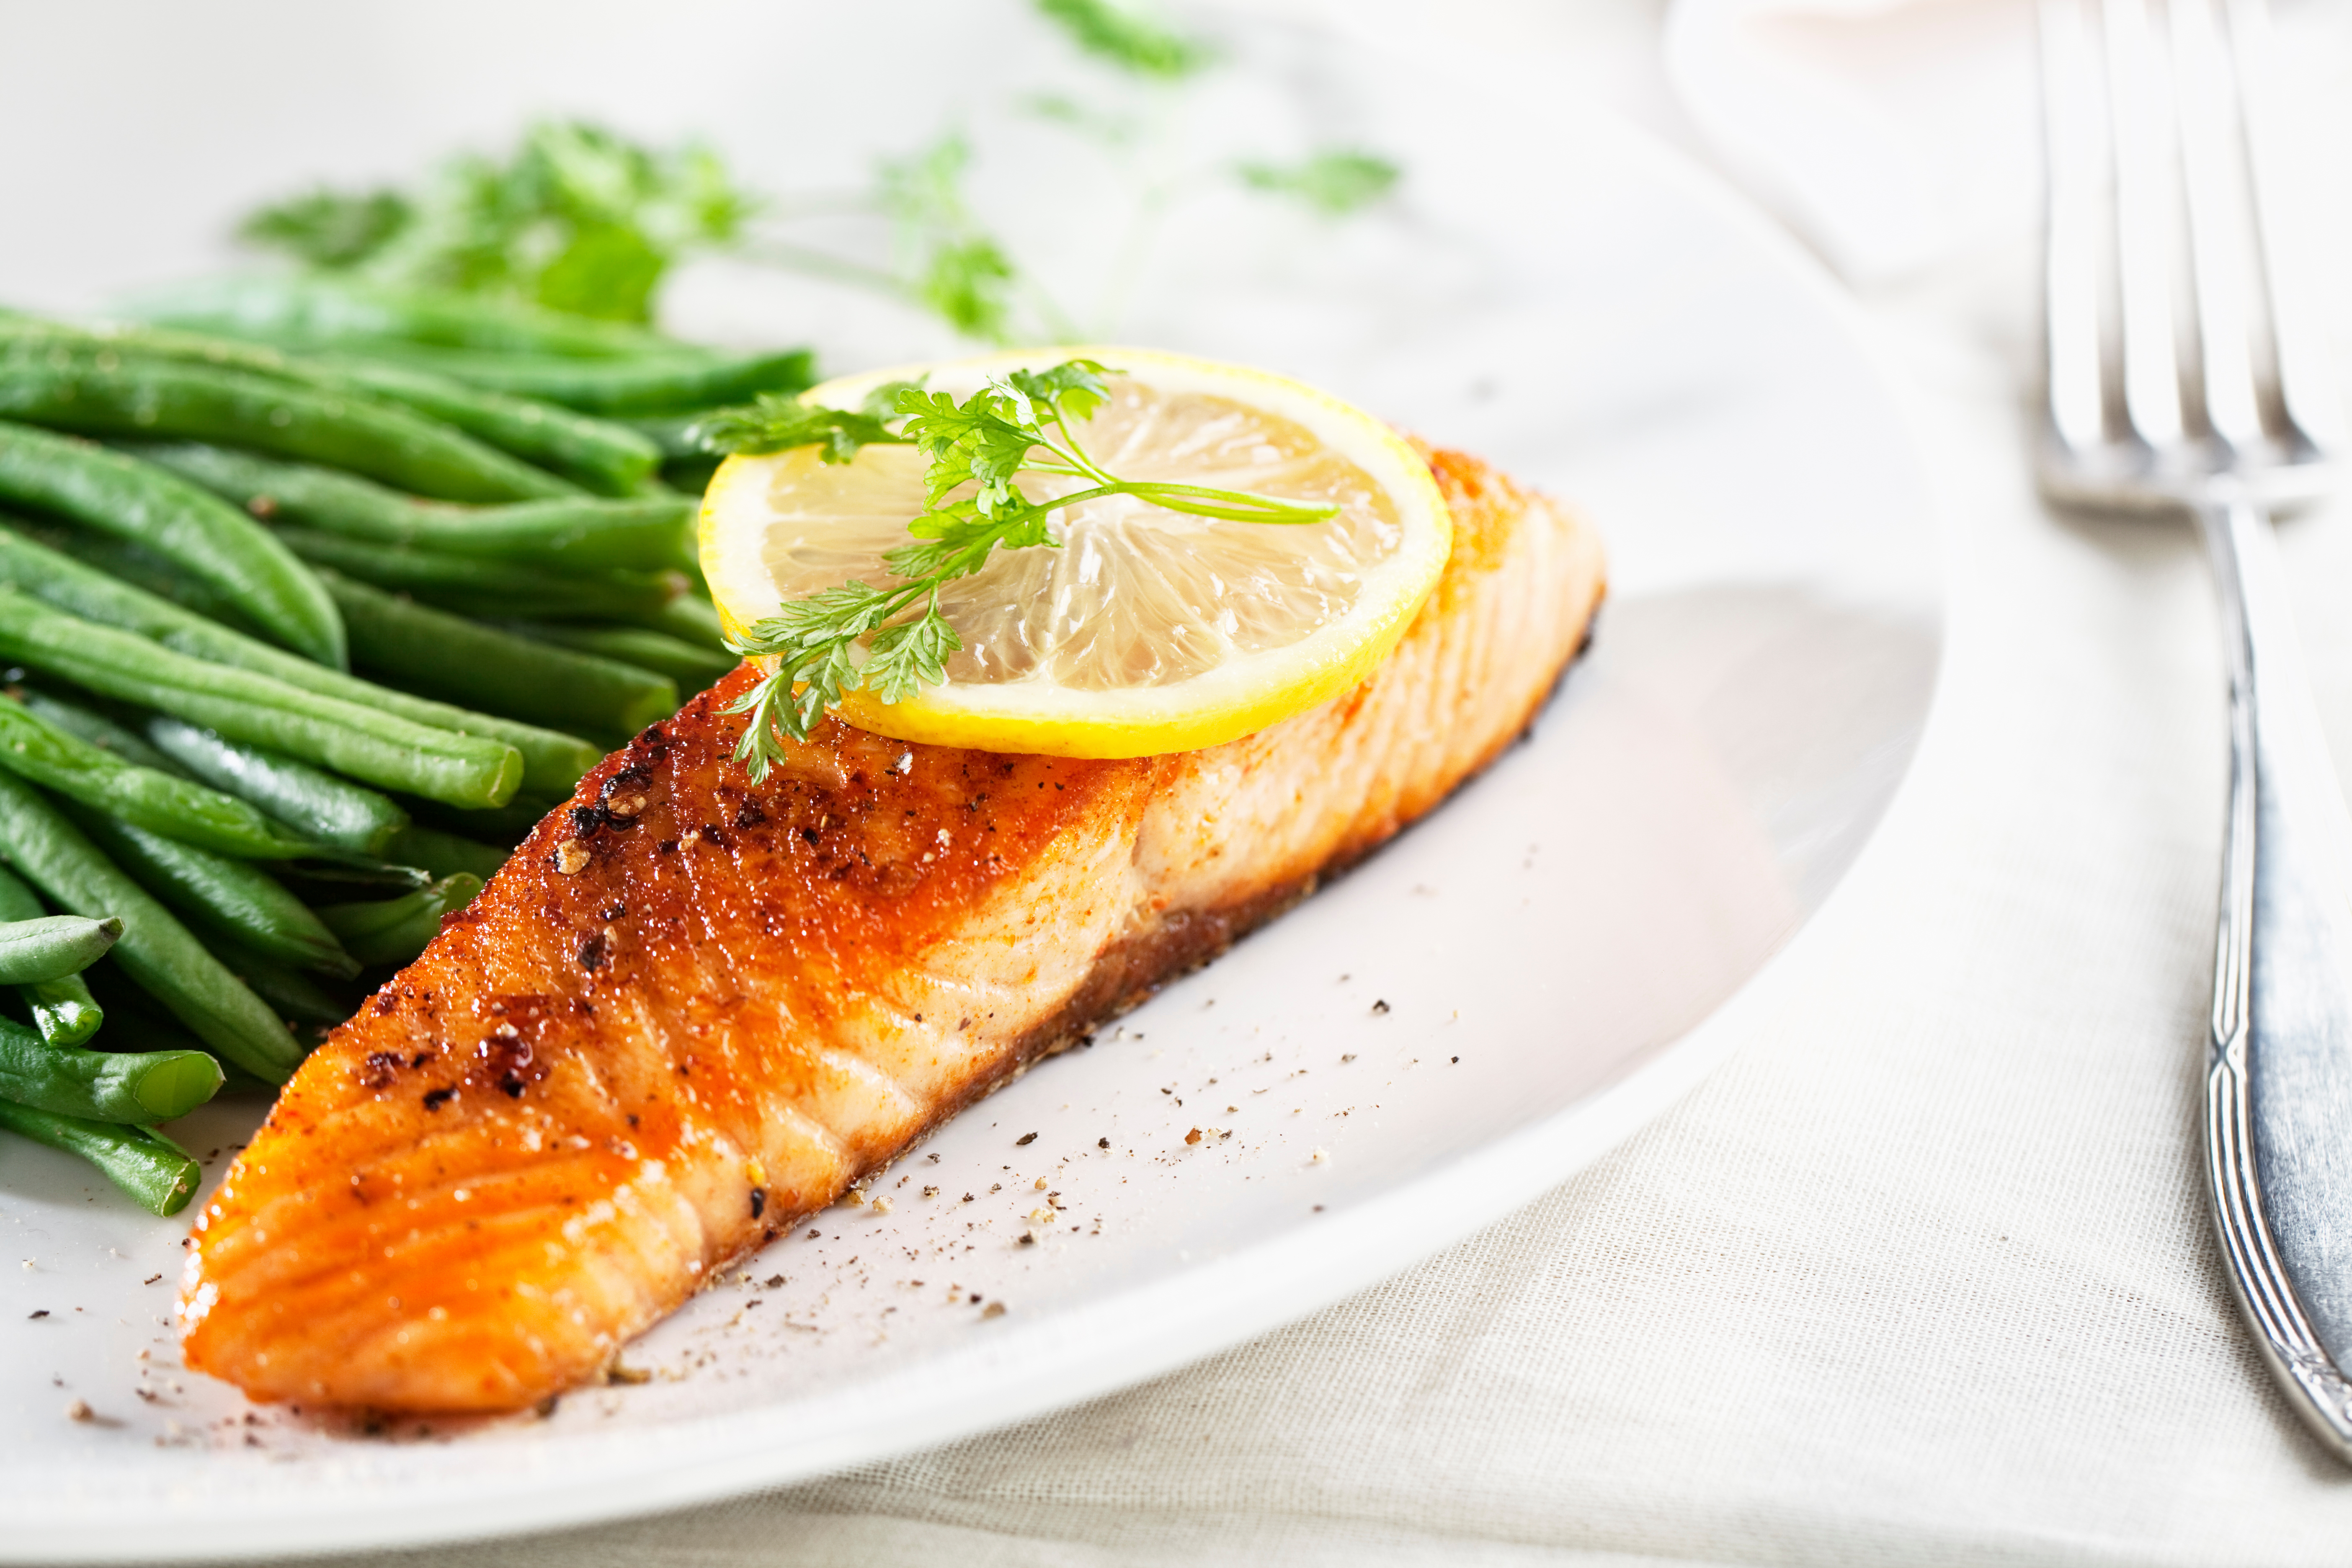 Cooked salmon is also good for feeling healthy the next day